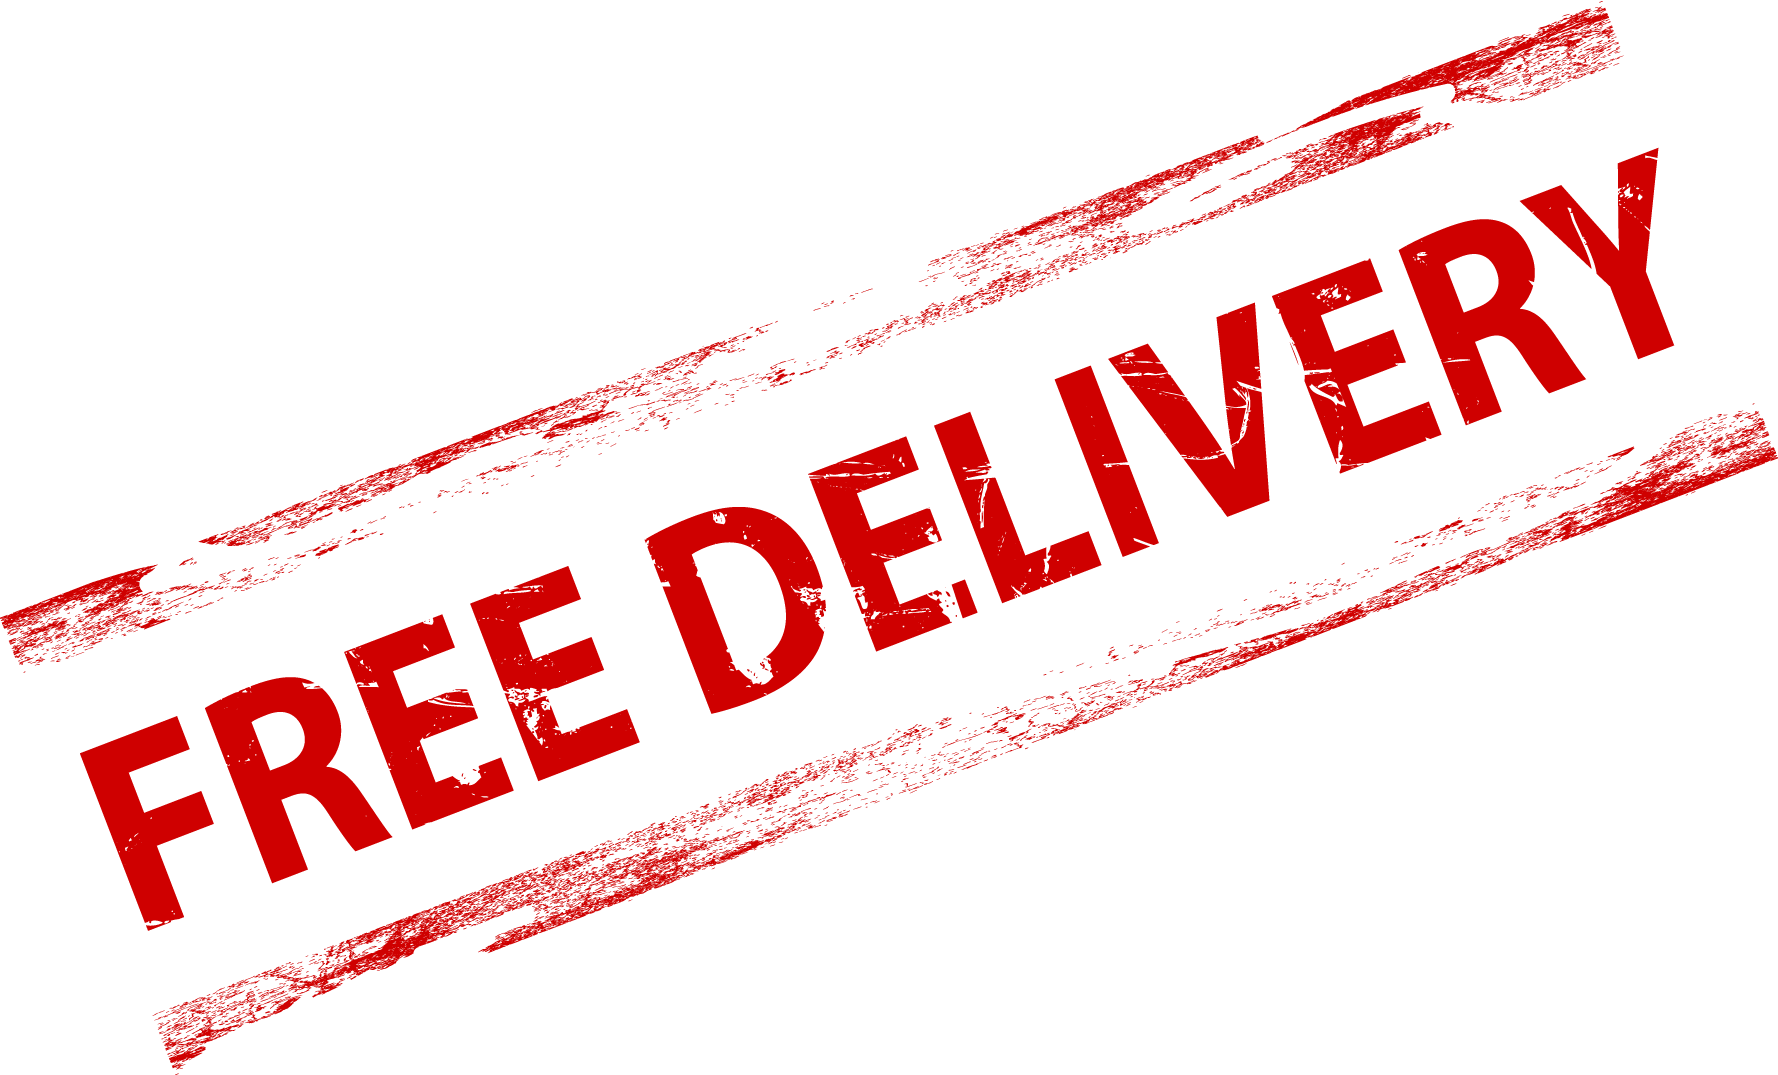 Free Delivery PNG Photo